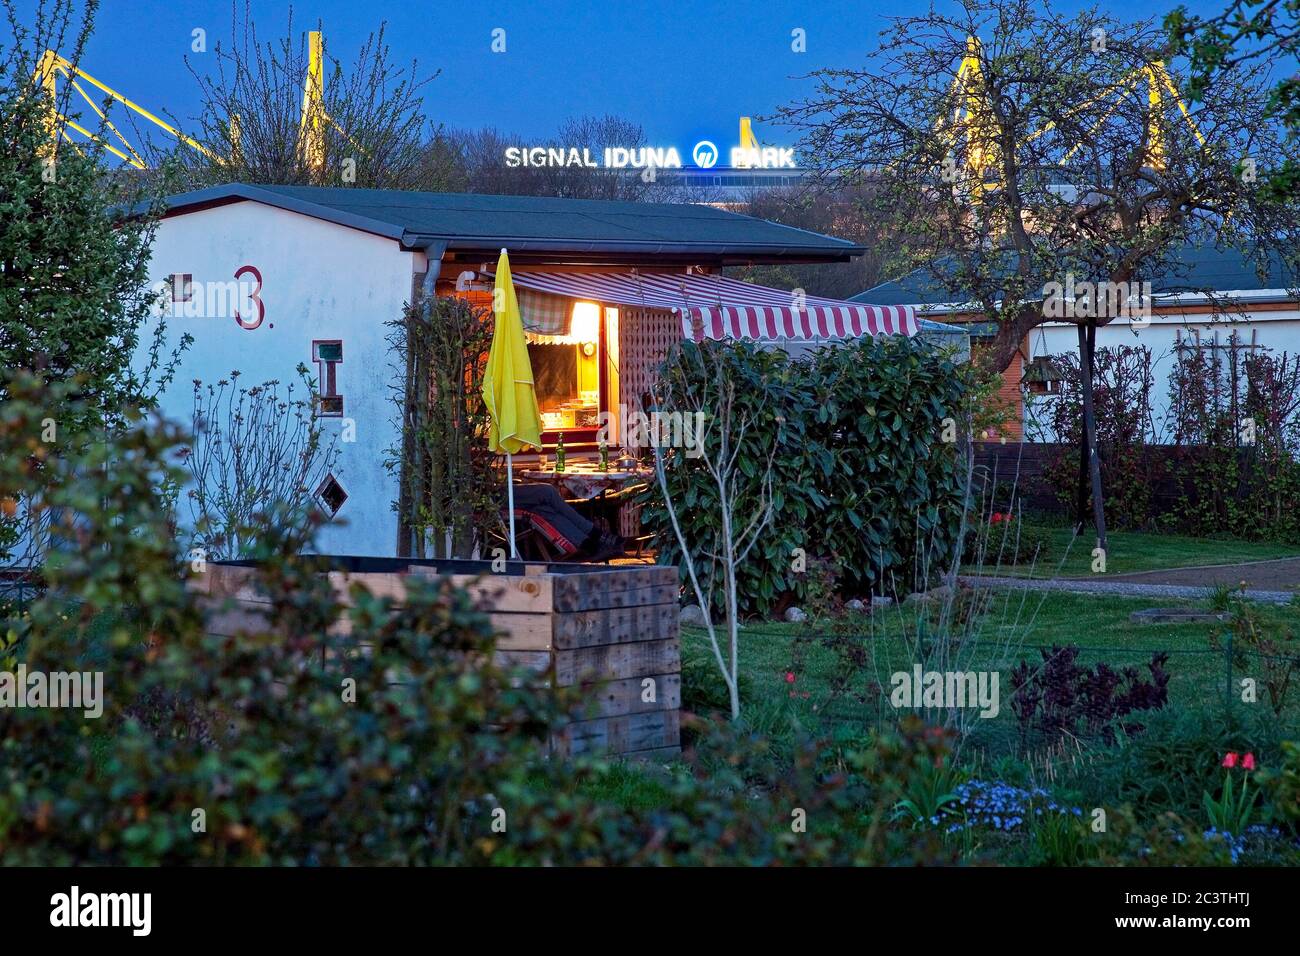 allotment garden in front of BVB Stadion Signal Iduna Park in the evening, Germany, North Rhine-Westphalia, Ruhr Area, Dortmund Stock Photo